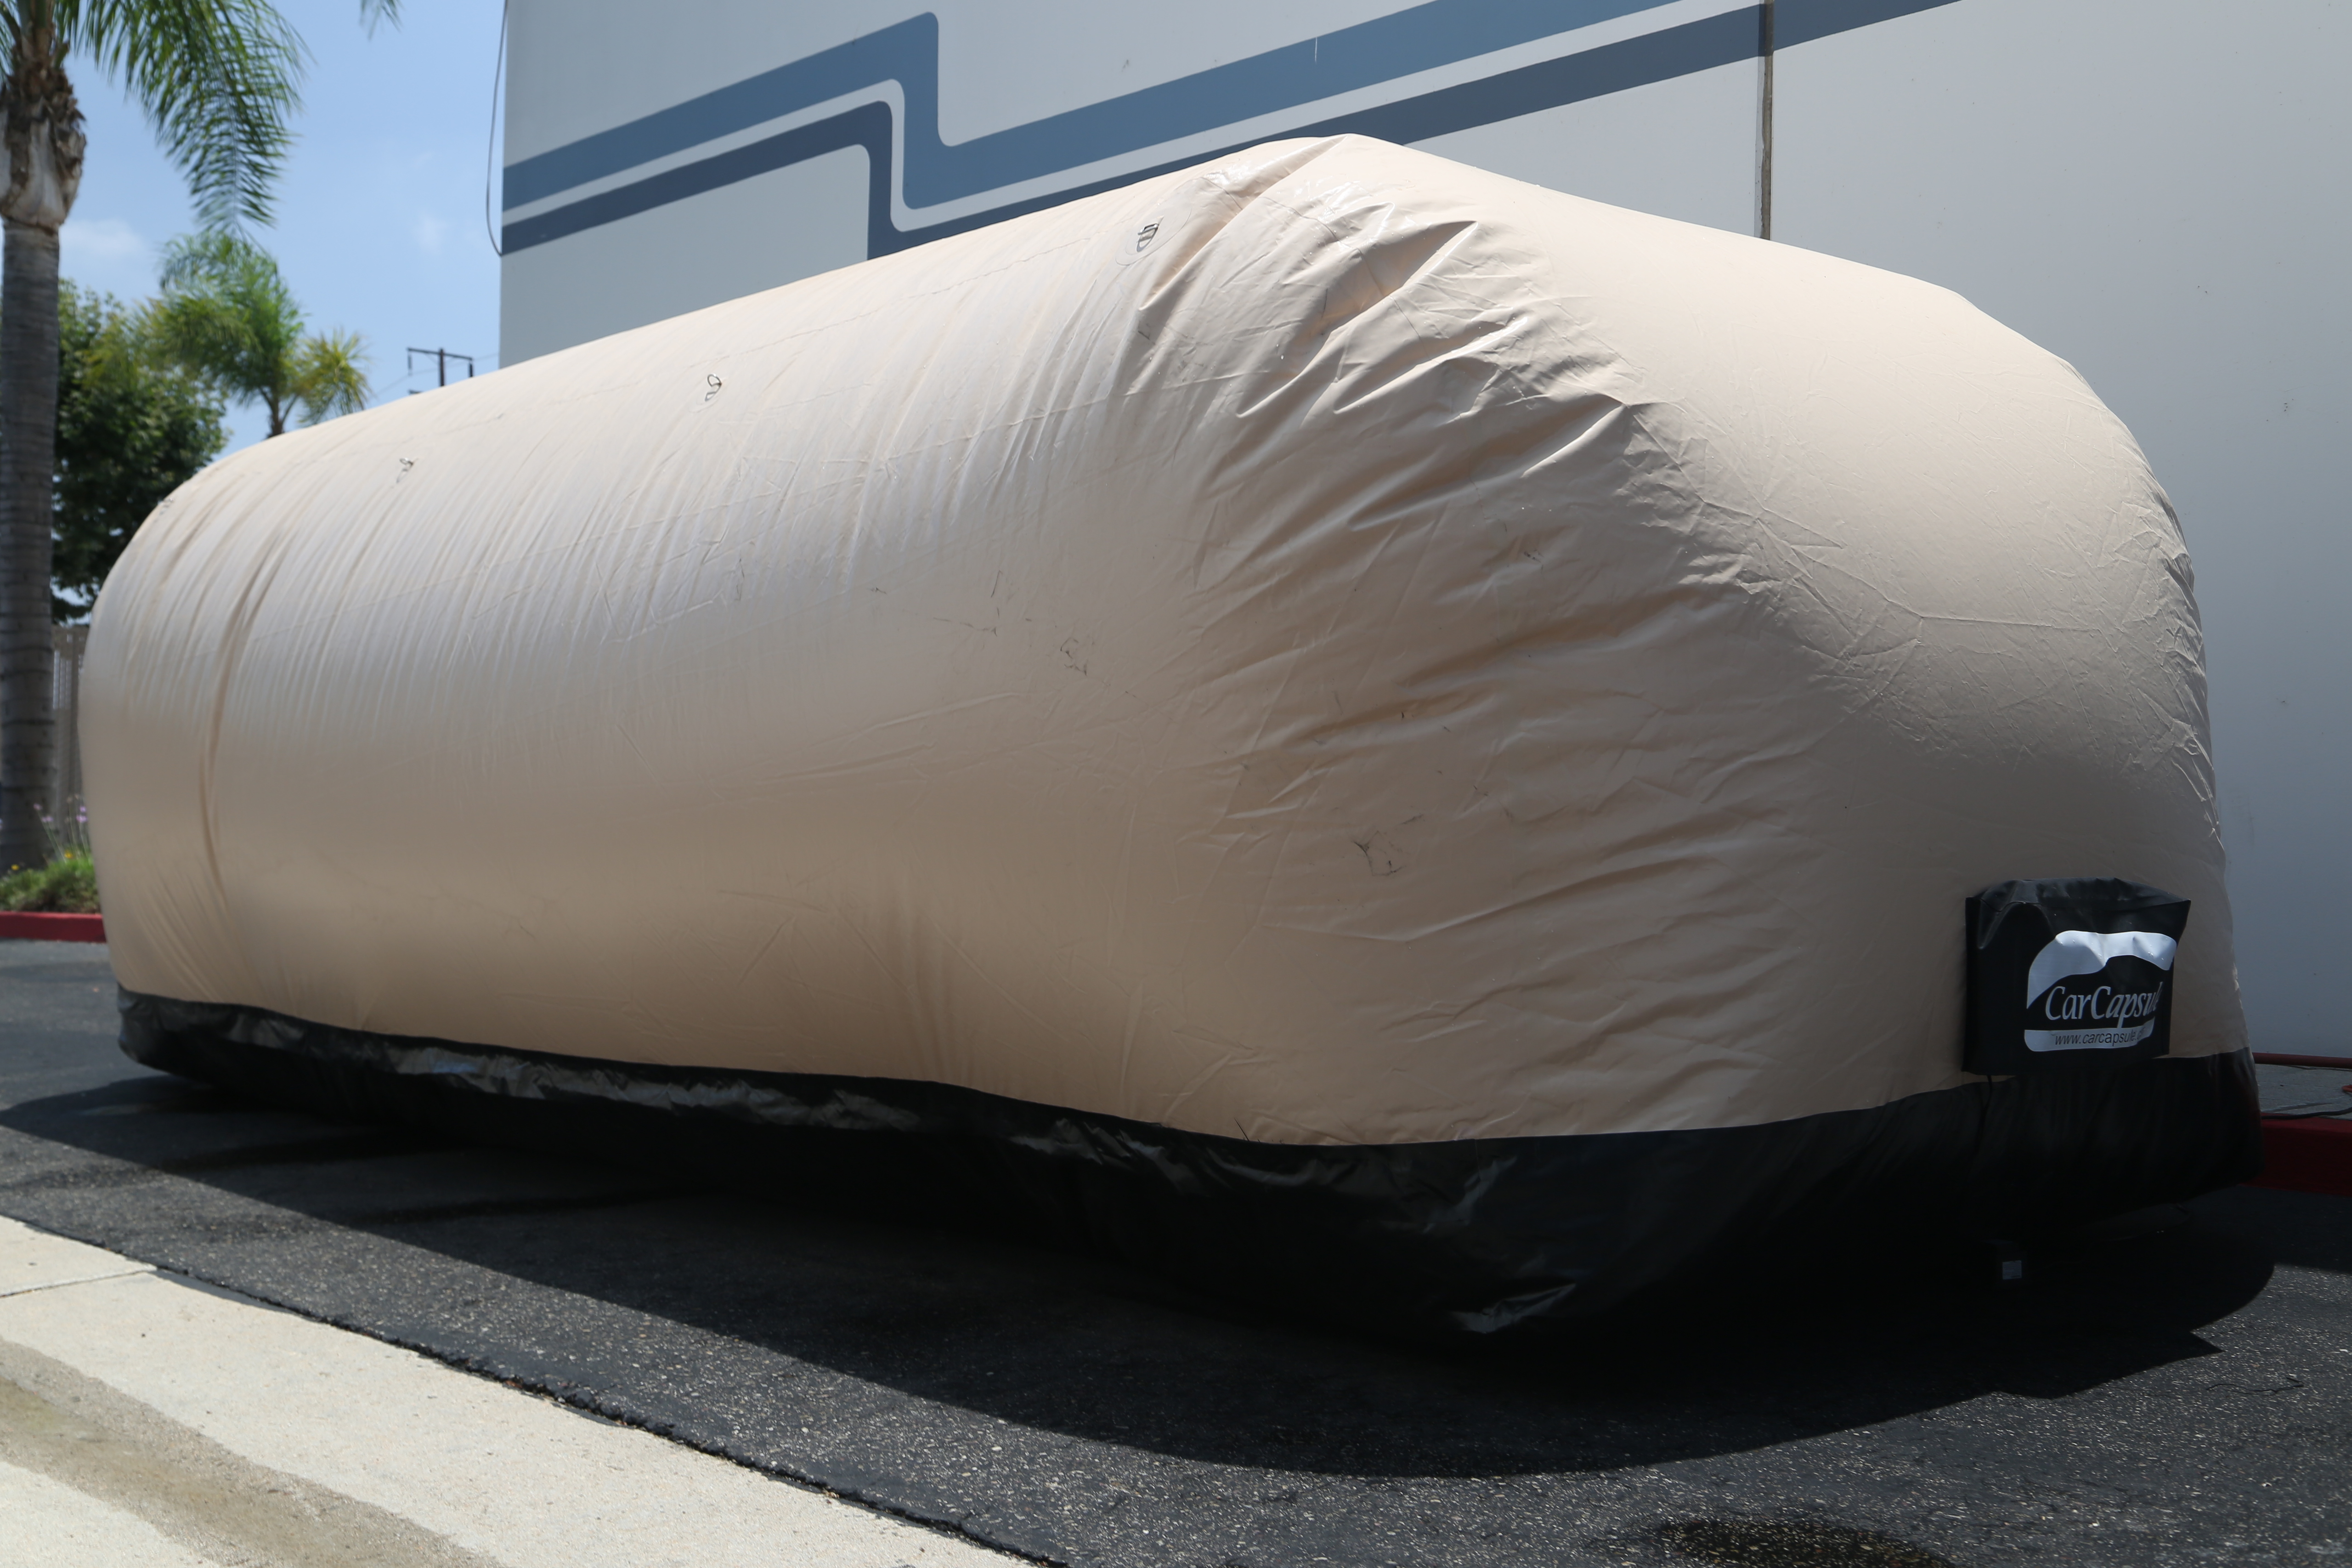 CarCapsule - Is It Really the Ultimate Vehicle Cover? - CarCapsule